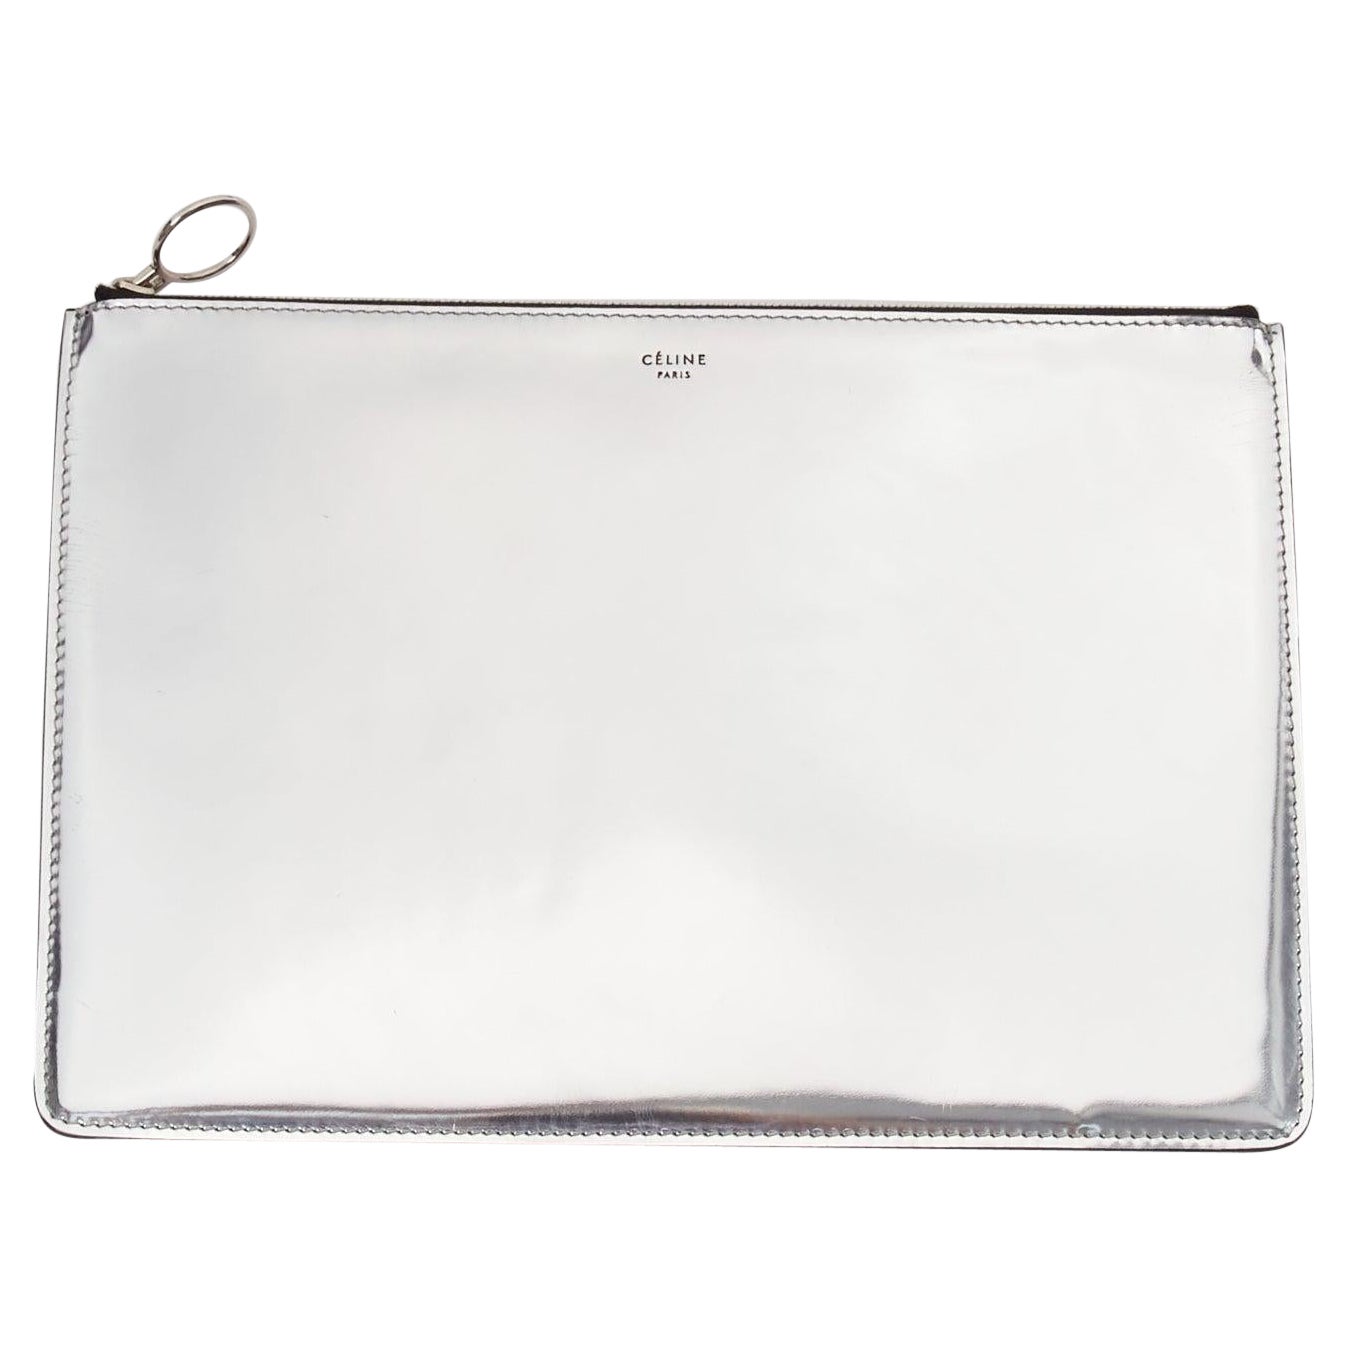 CELINE silver mirrored leather flat O ring zip pouch clutch bag